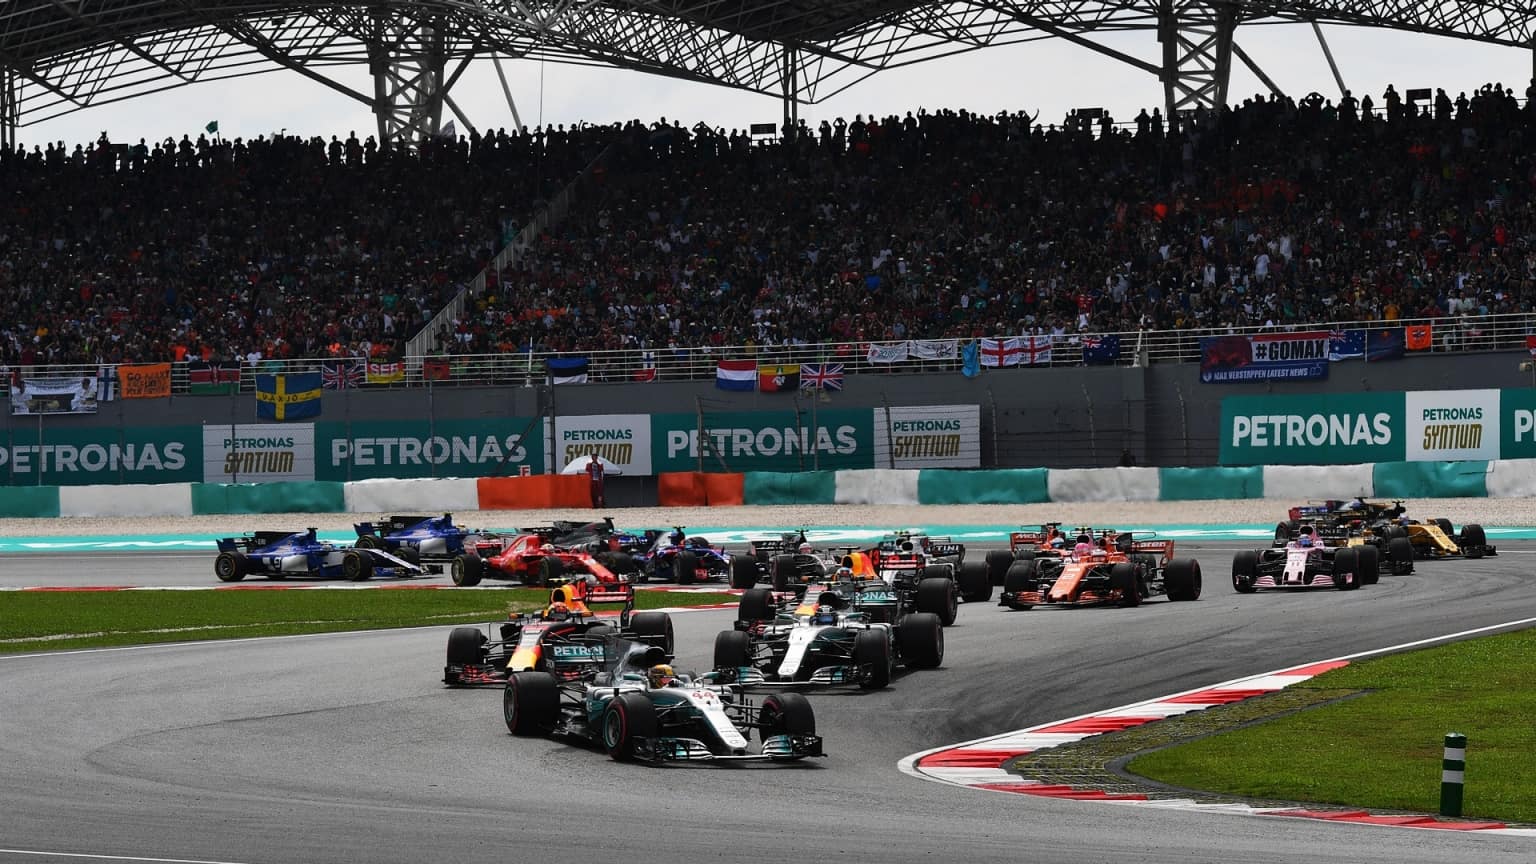 3 Years After F1's Departure – Has Our Motorsports Scene Changed?